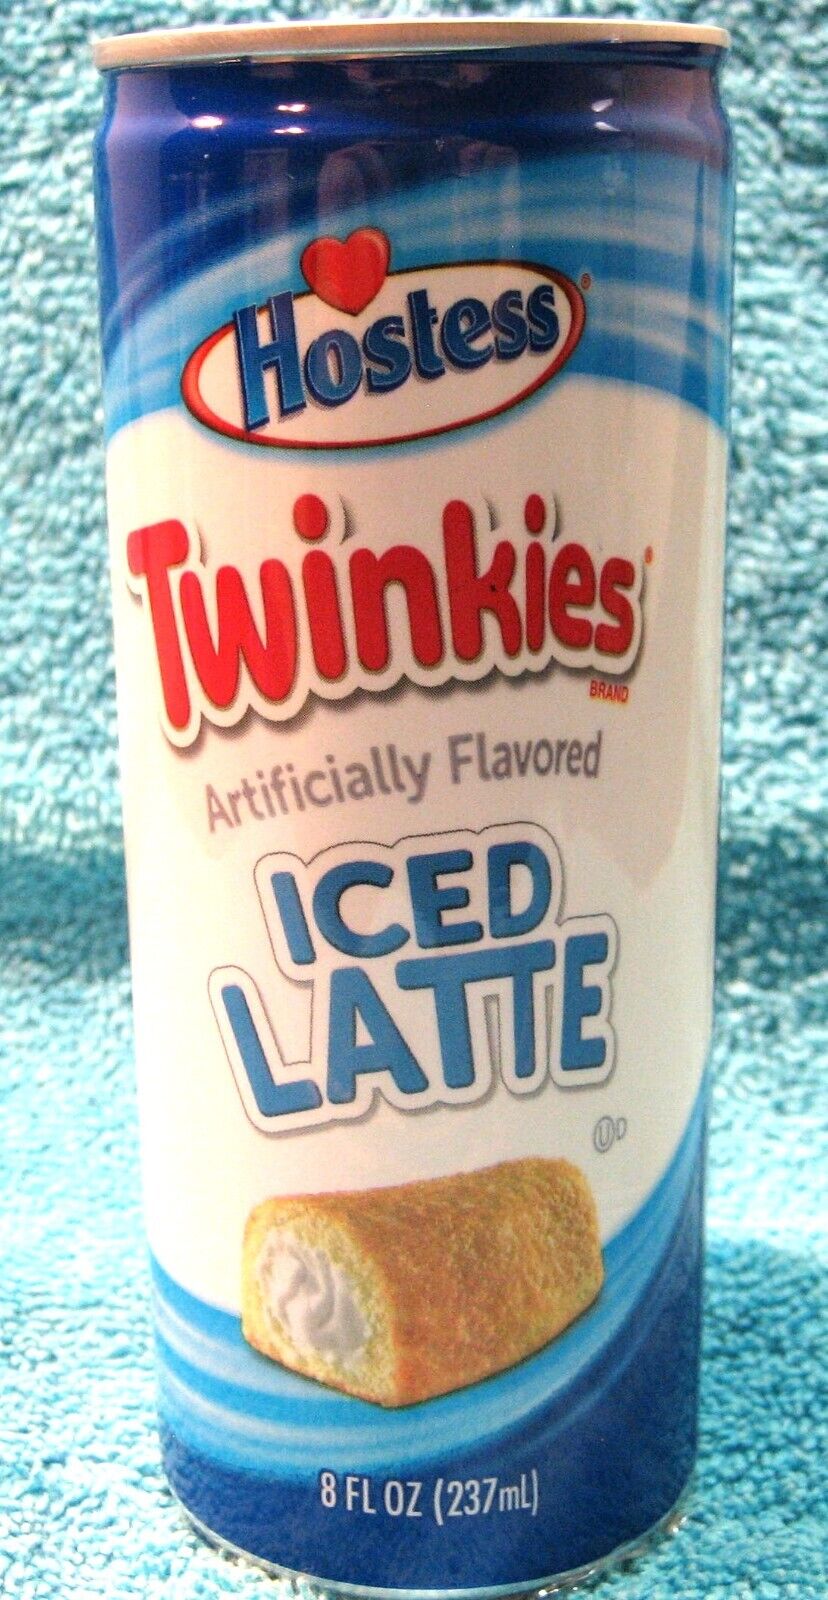 Hostess Twinkies Iced Latte, 1 - 8 Oz. Can, Mix It With Kahlua  